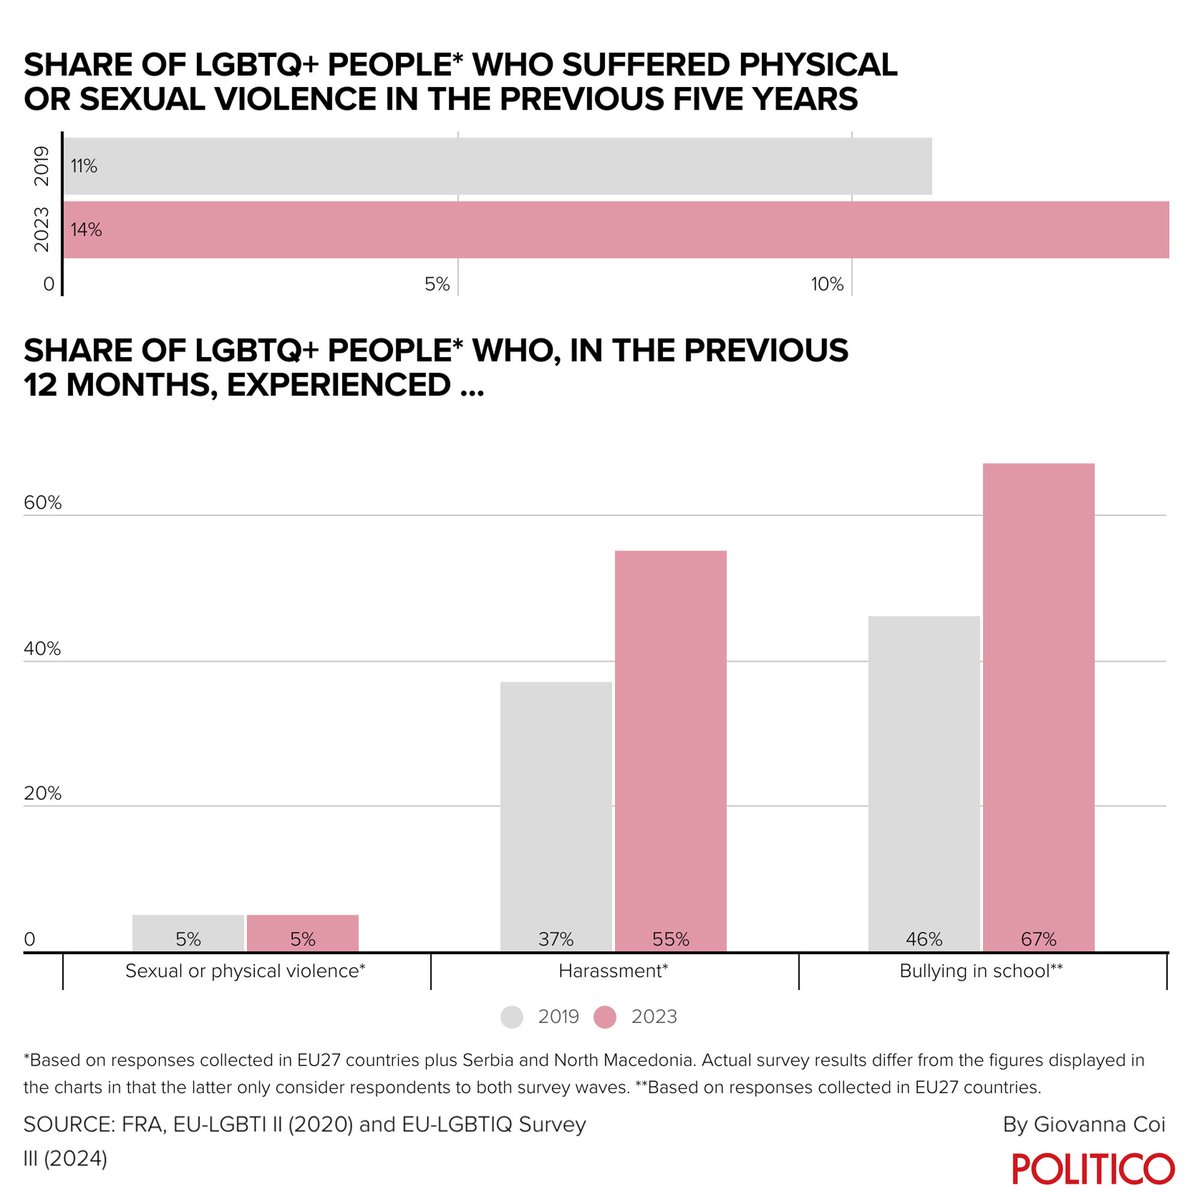 In Europe, LGBTQ+ people are facing rising violence, including an uptick in harassment and bullying, according to new data released this week. Read the full story: trib.al/JBhfaFj